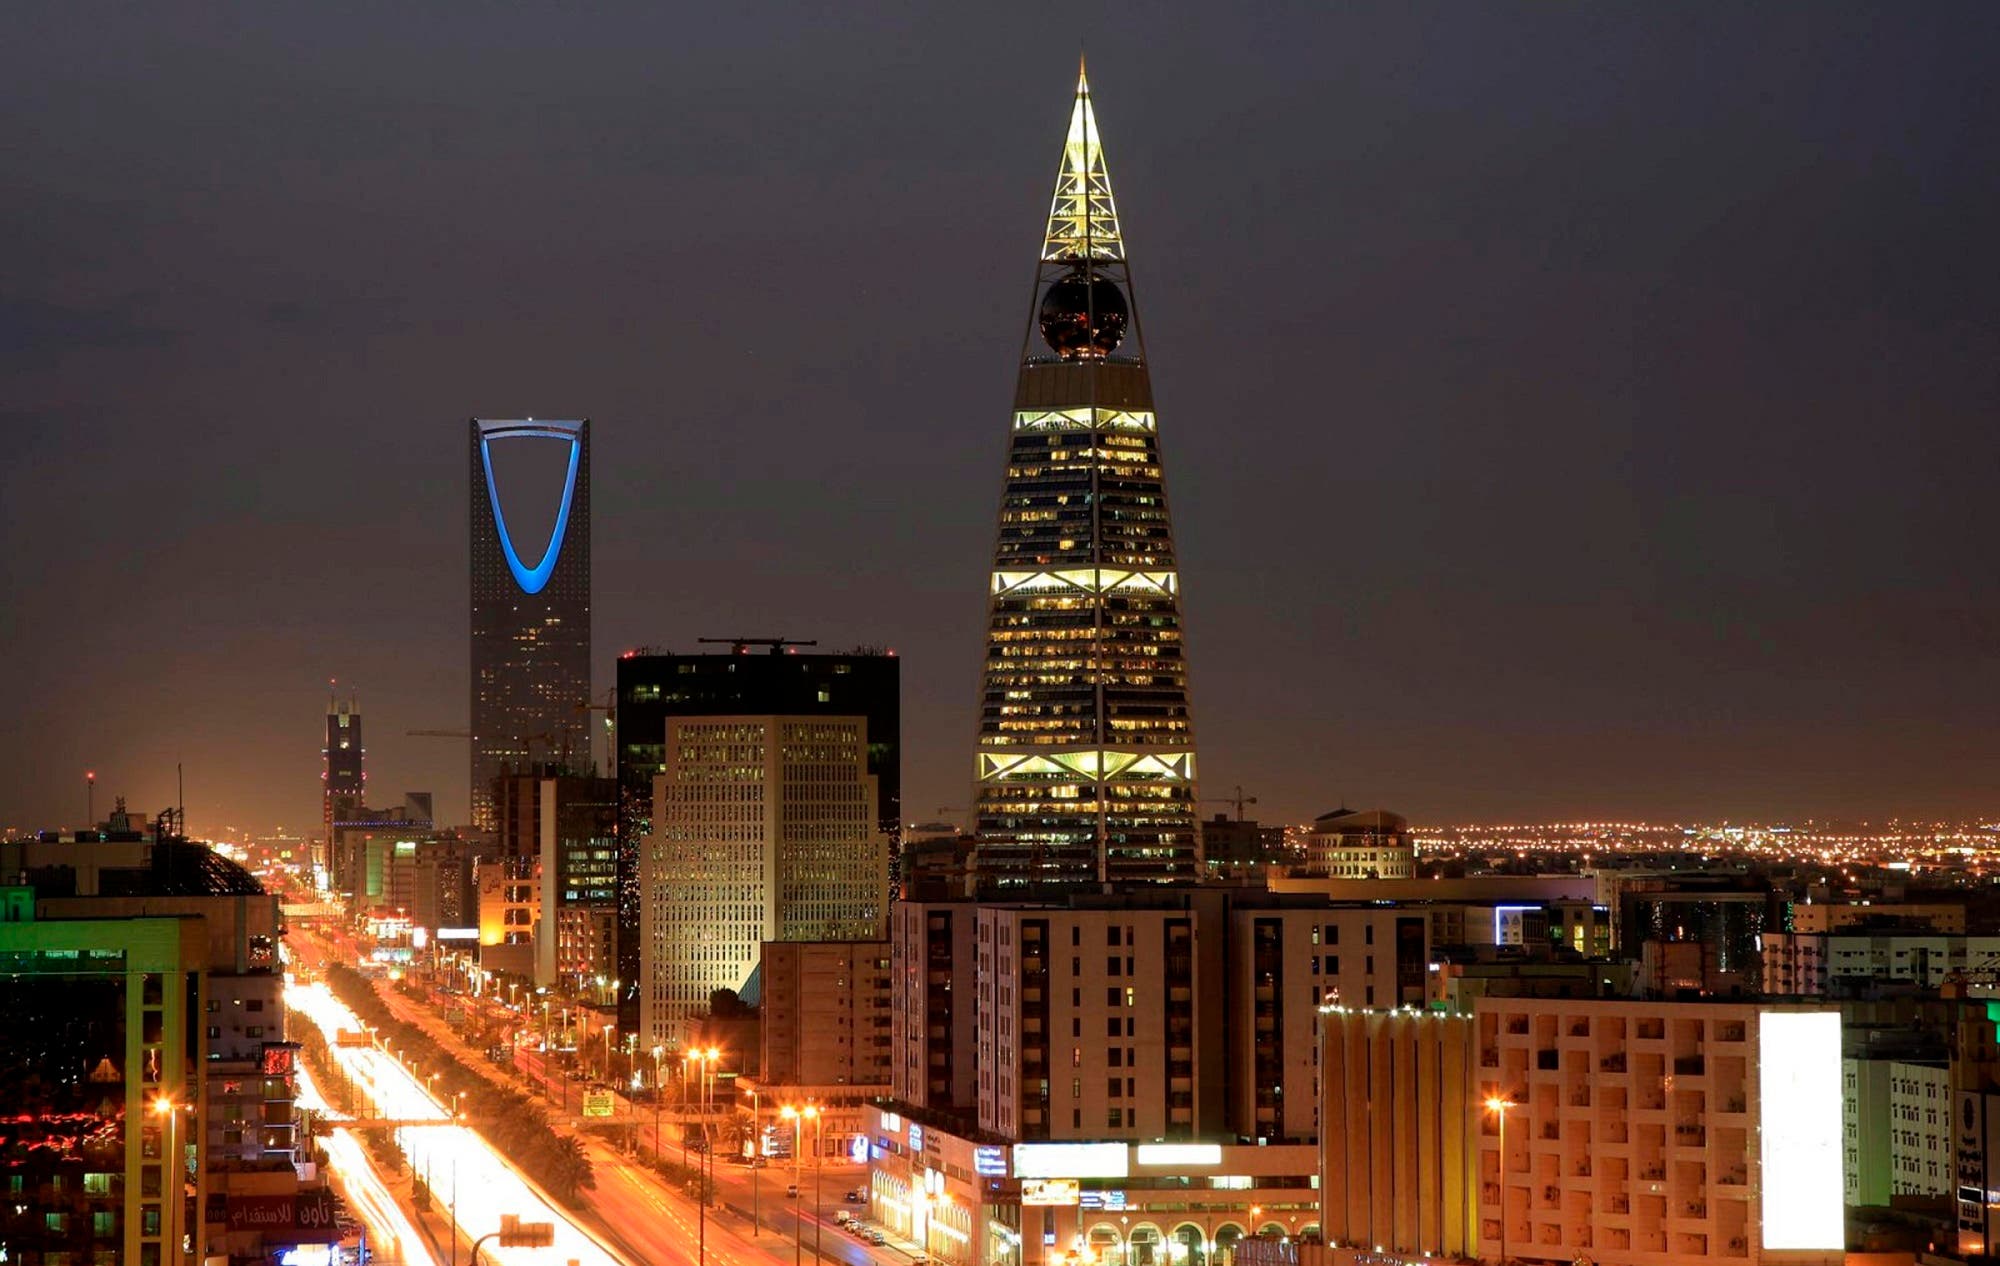 Saudi Arabia is liberalising business regulations to attract more investors and diversify its economy away from oil. (AP)